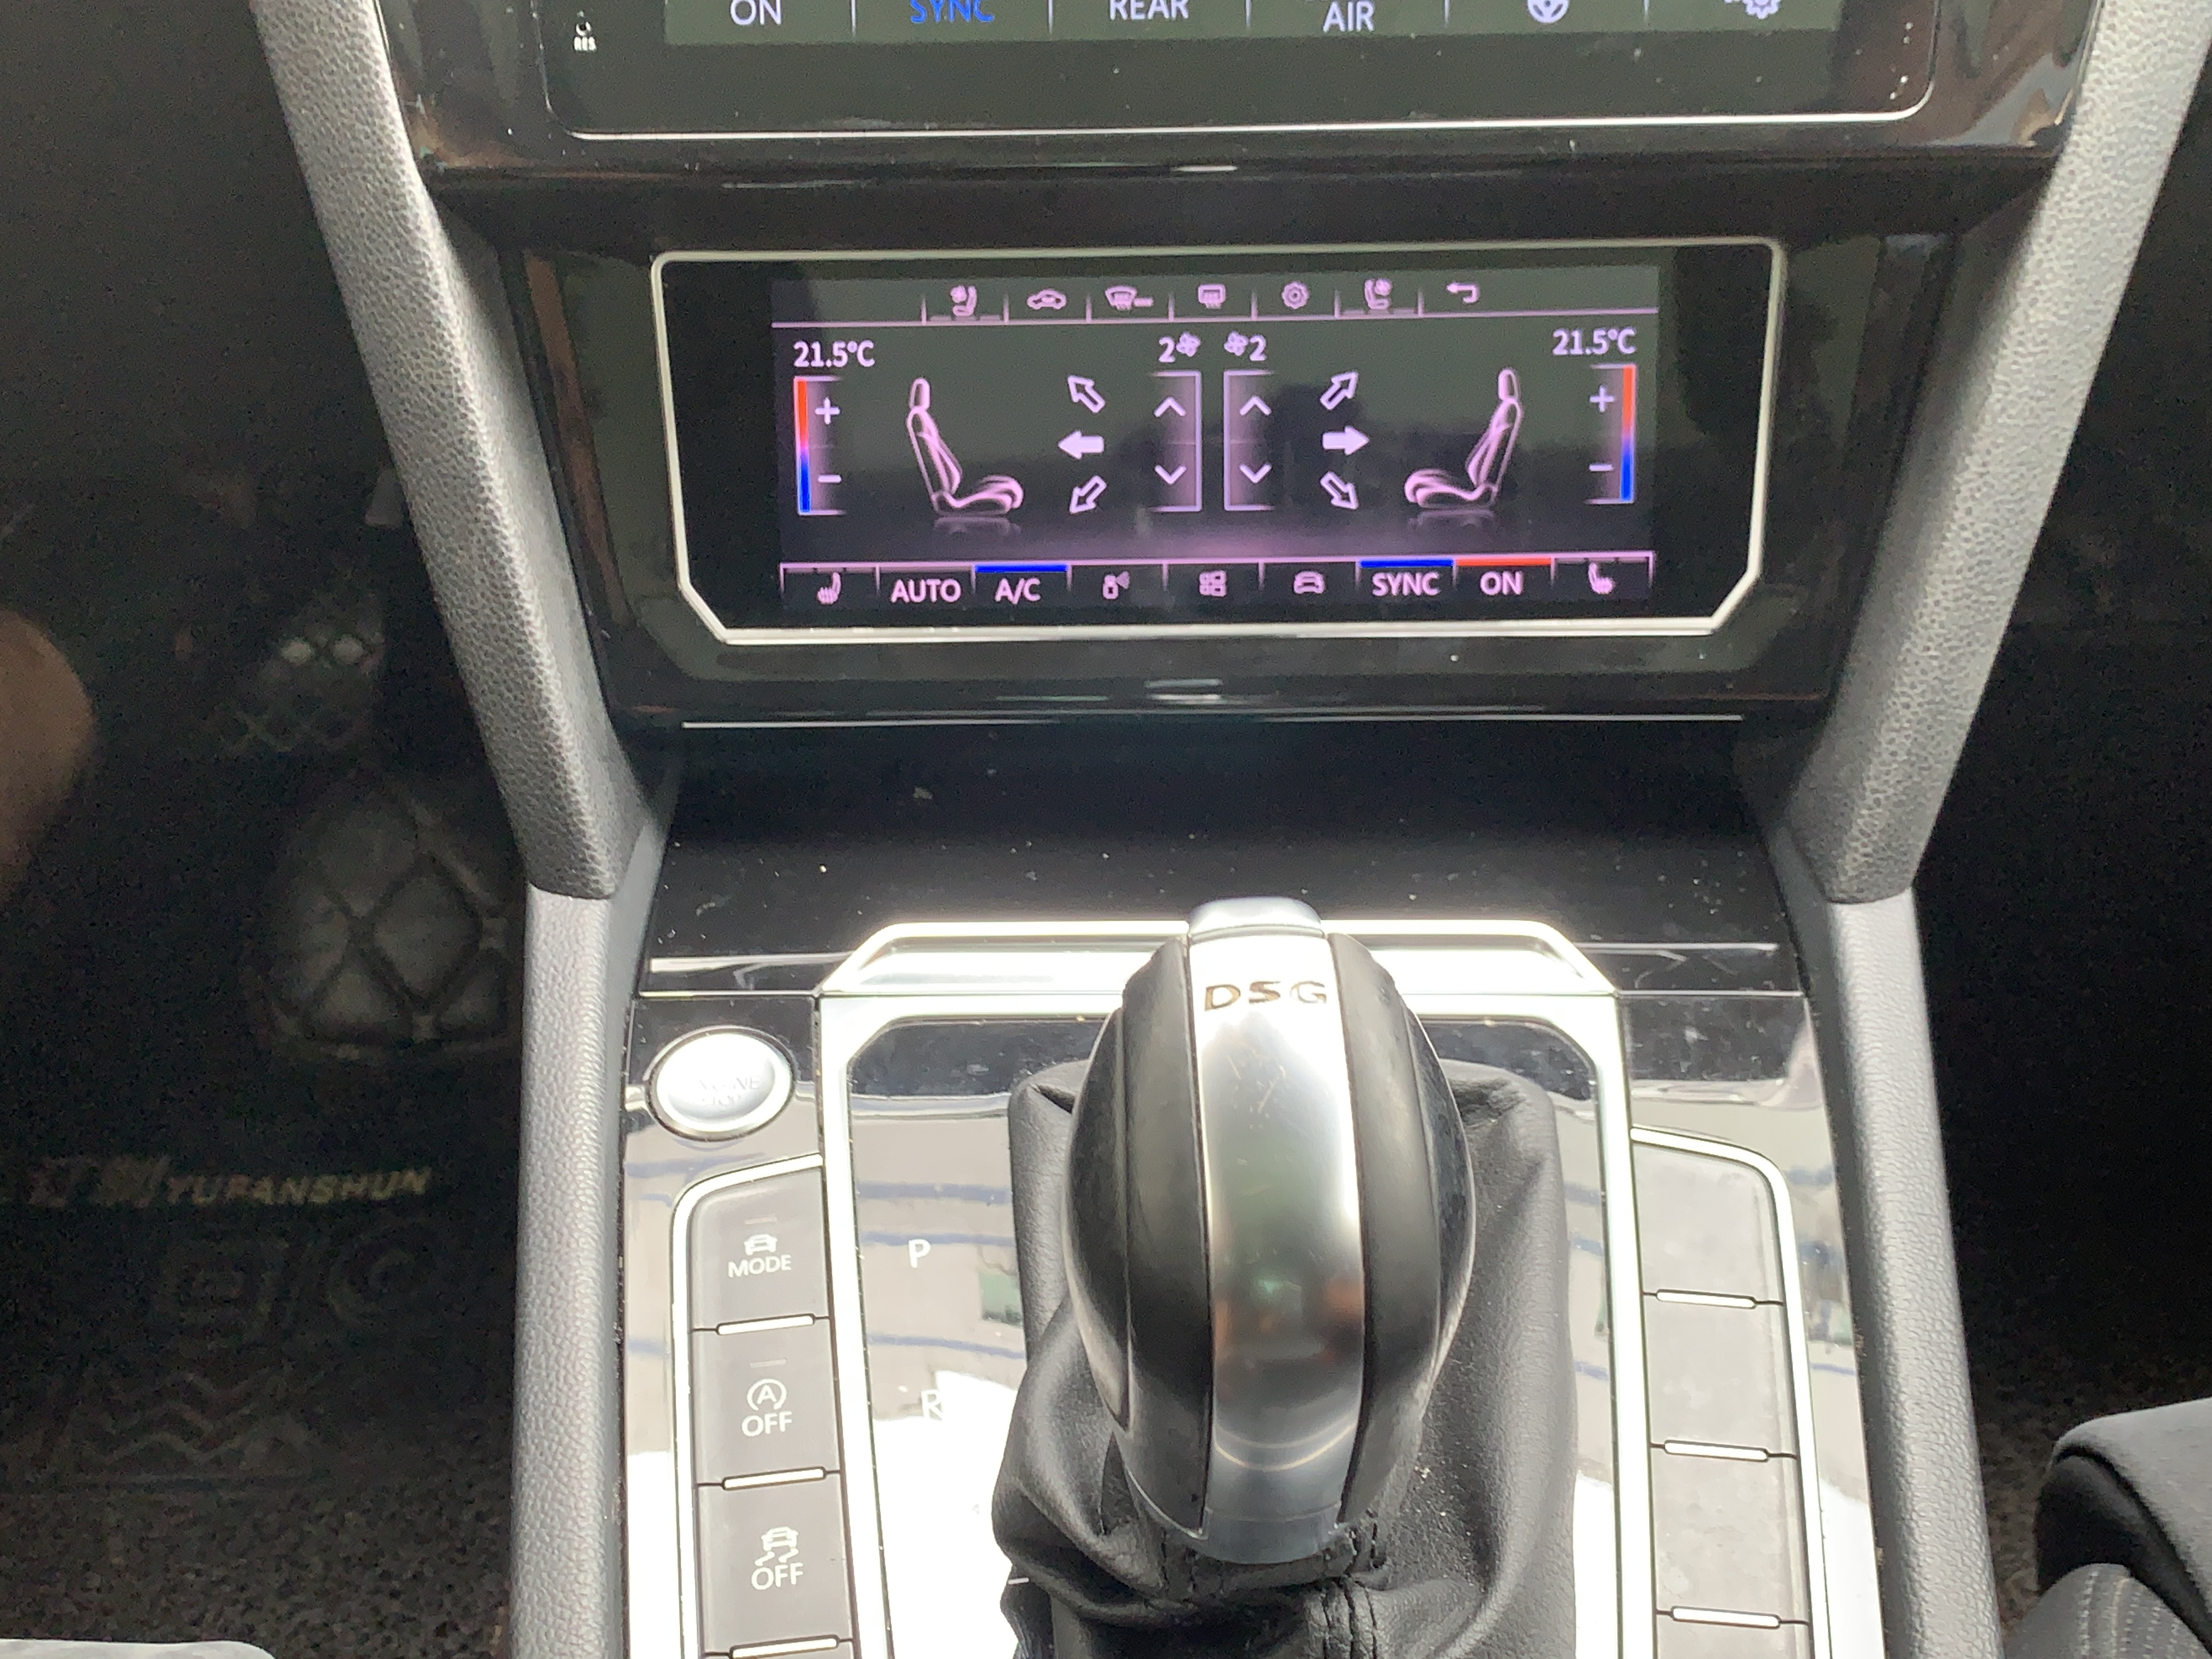 5 Climate Control Customization Ideas for VW Golf 7 with Audiosources Digital Panel